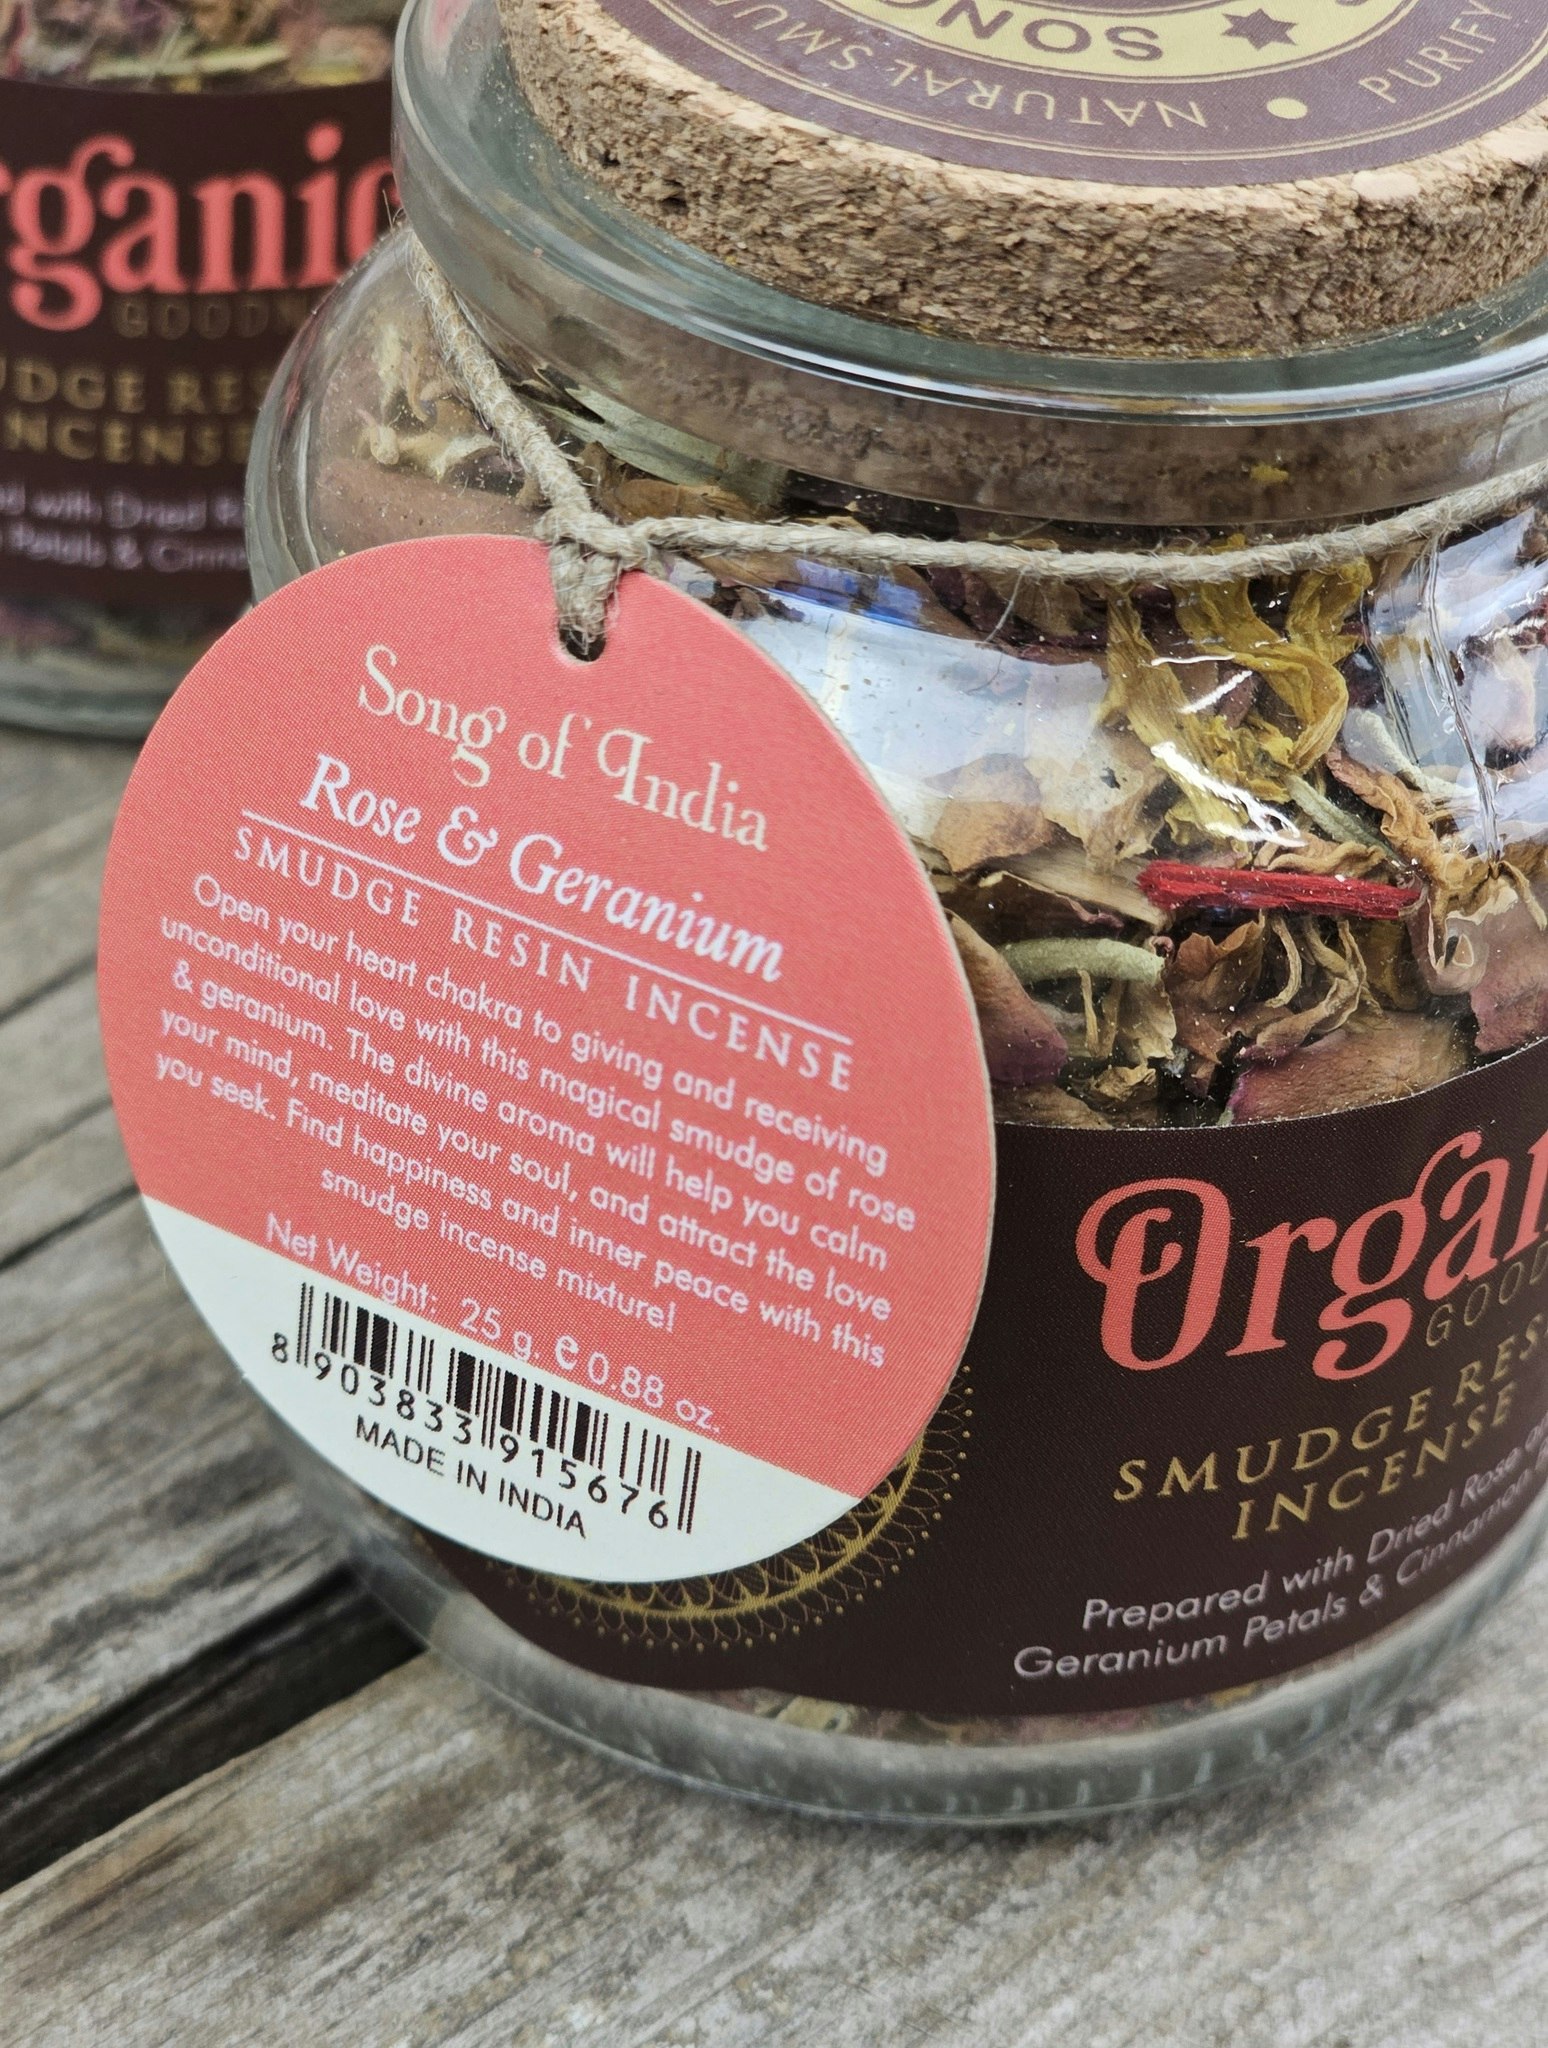 Song Of India - Rose & geranium, smudge resin